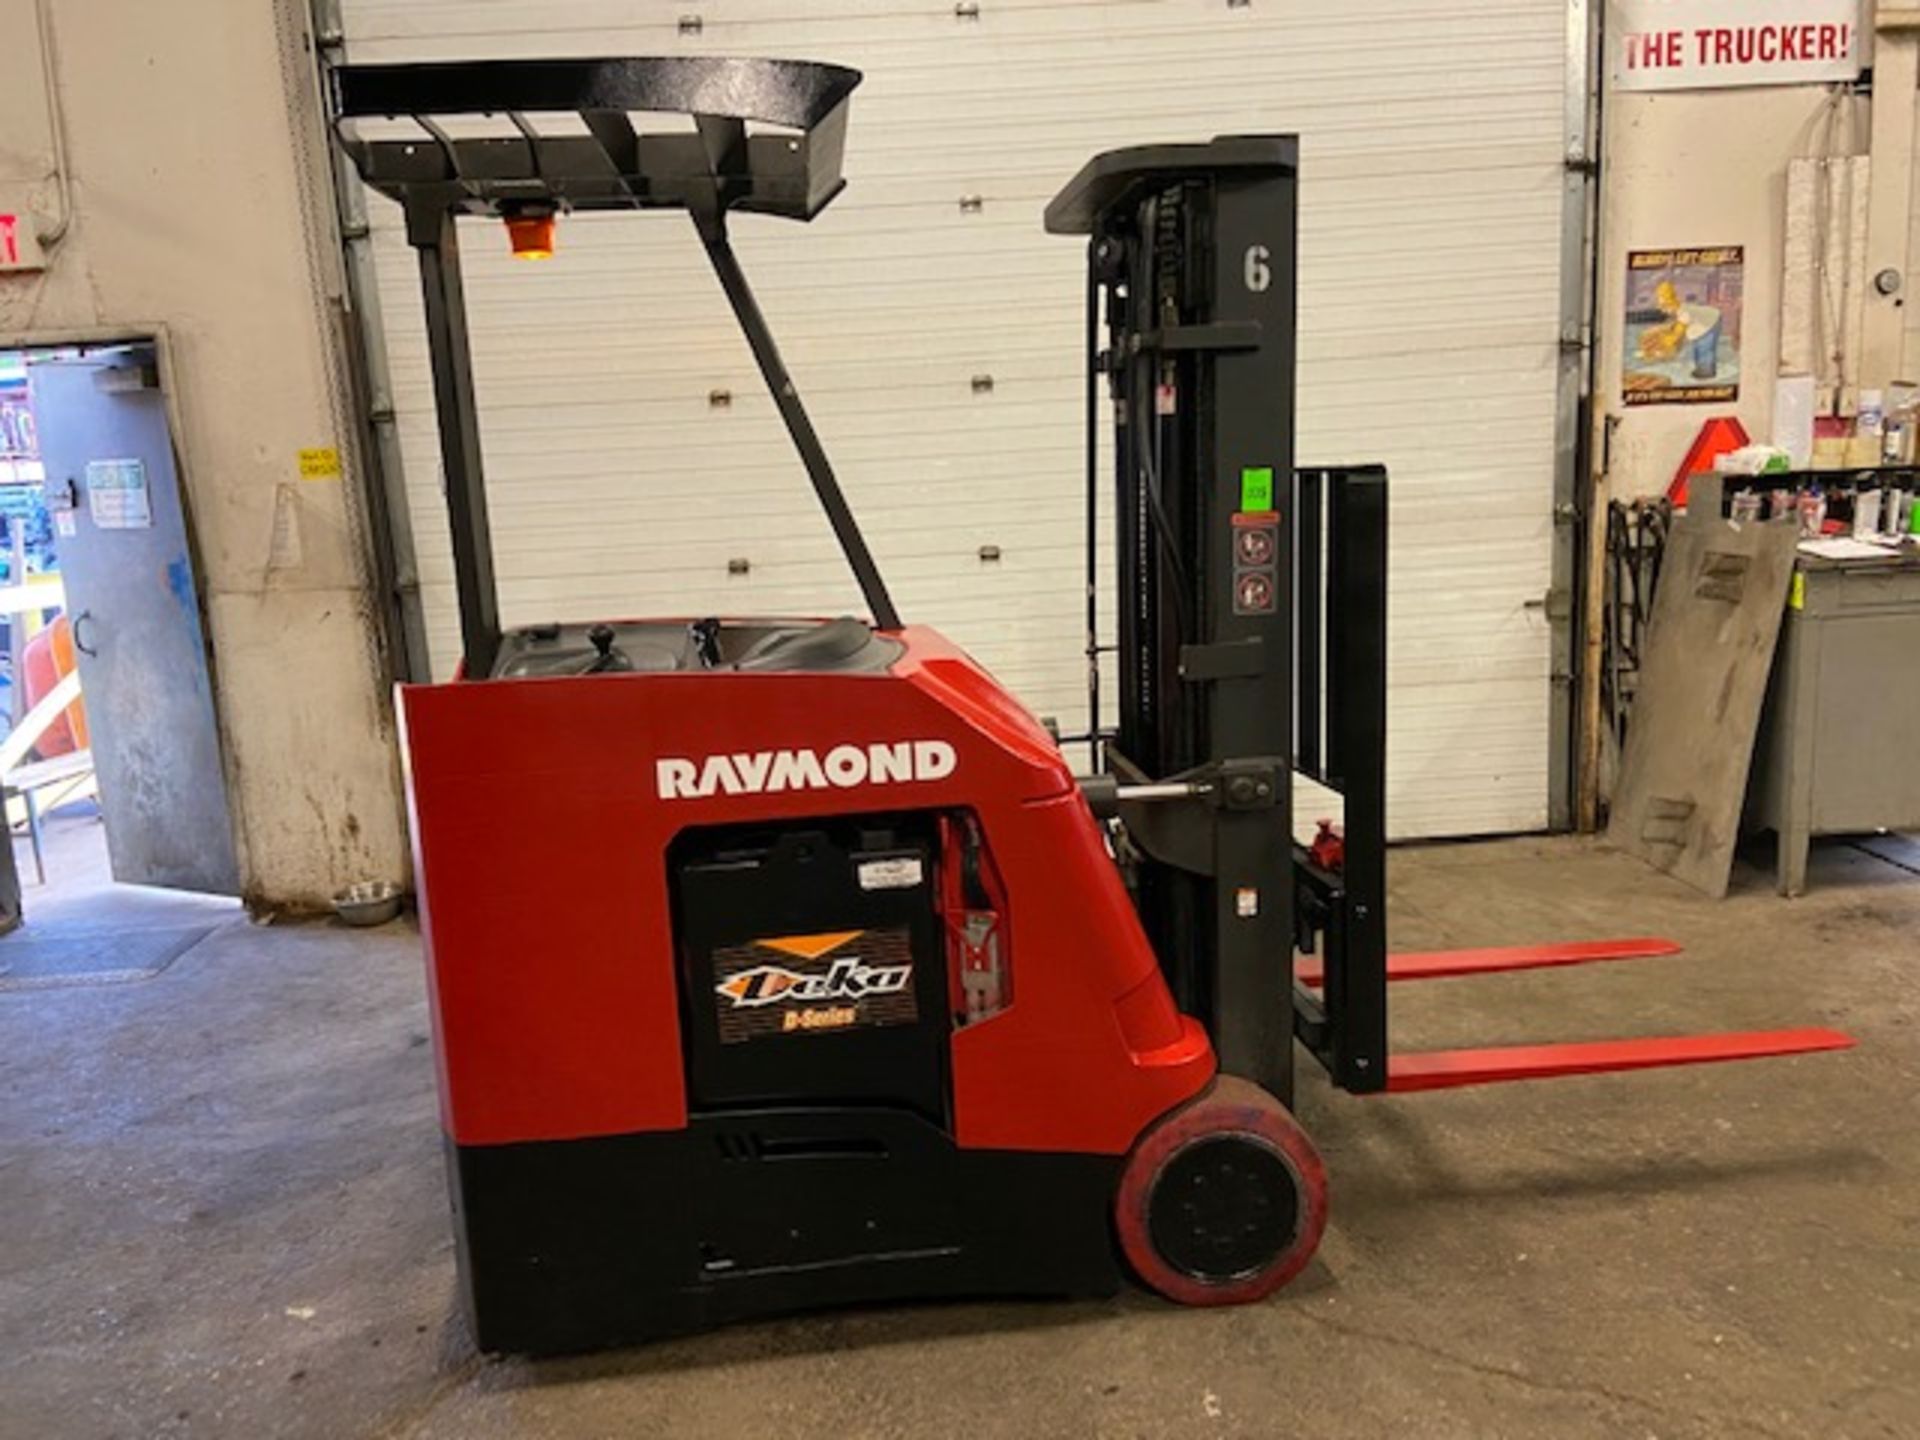 FREE CUSTOMS - 2013 Raymond 5000lbs Capacity Stand On Forklift Electric with 3-STAGE MAST sideshift